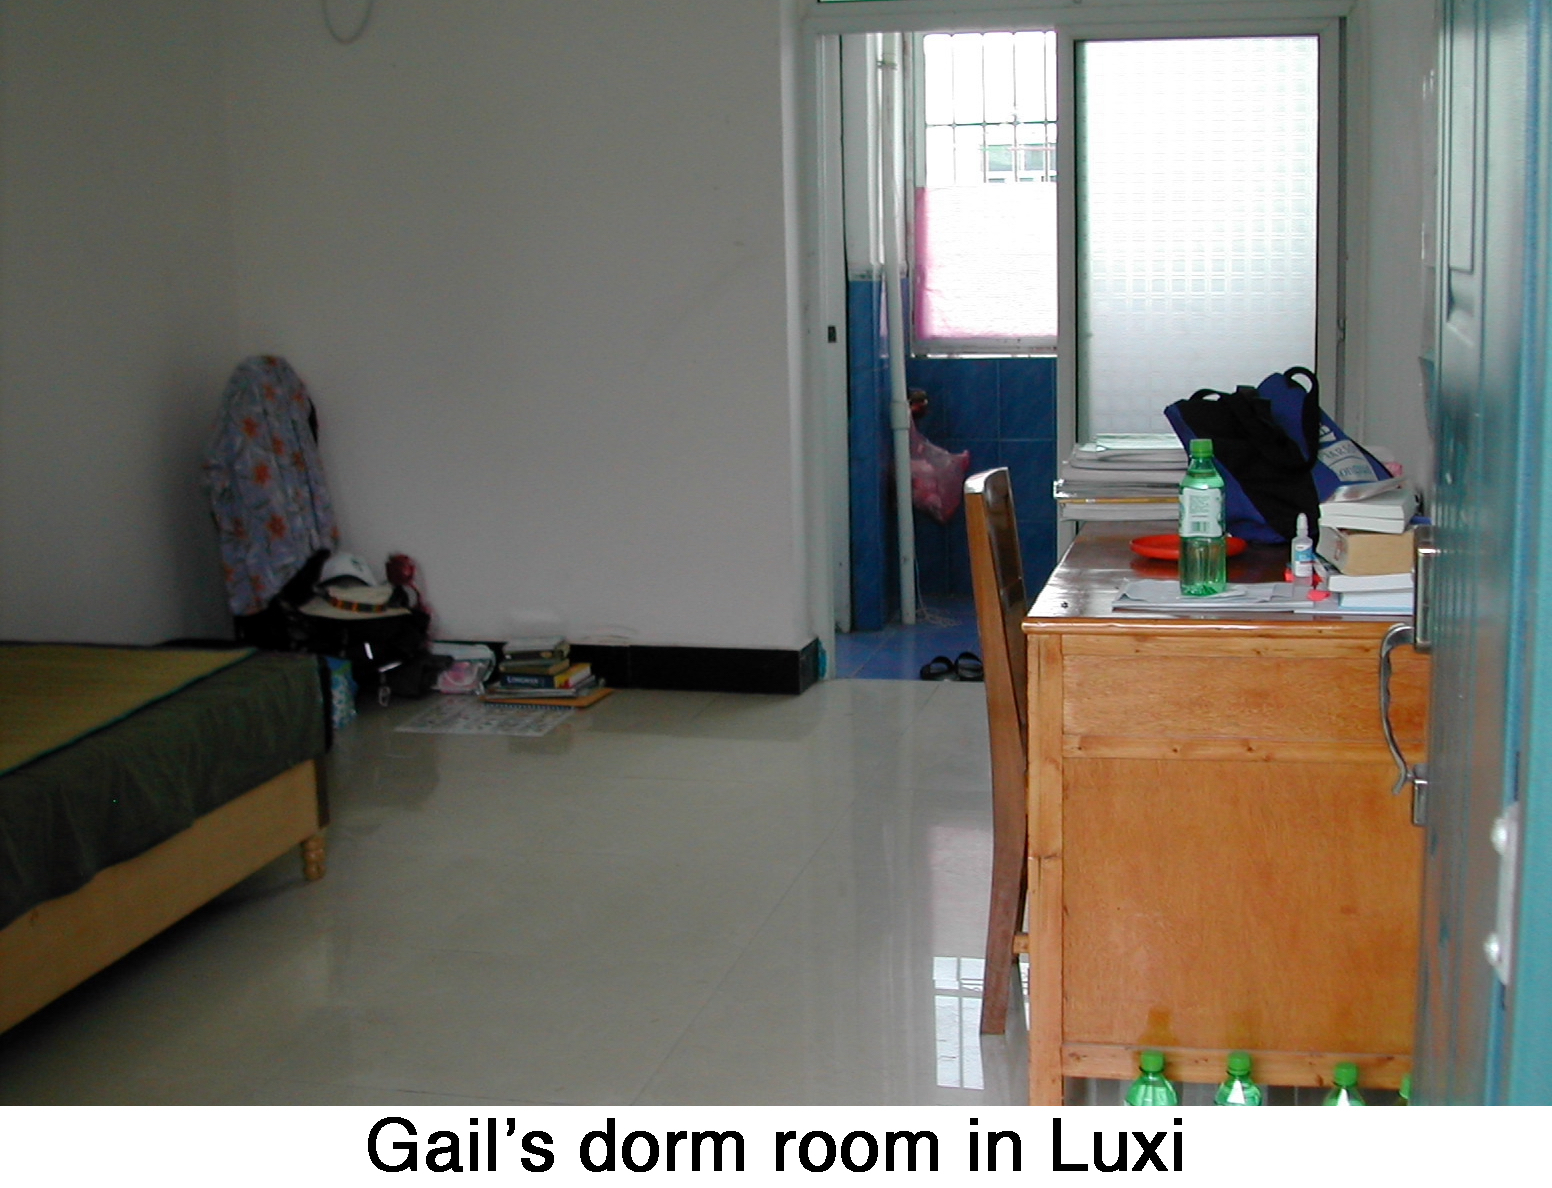 Gail’s room at Luxi, a bed, a wooden desk, and a bathroom